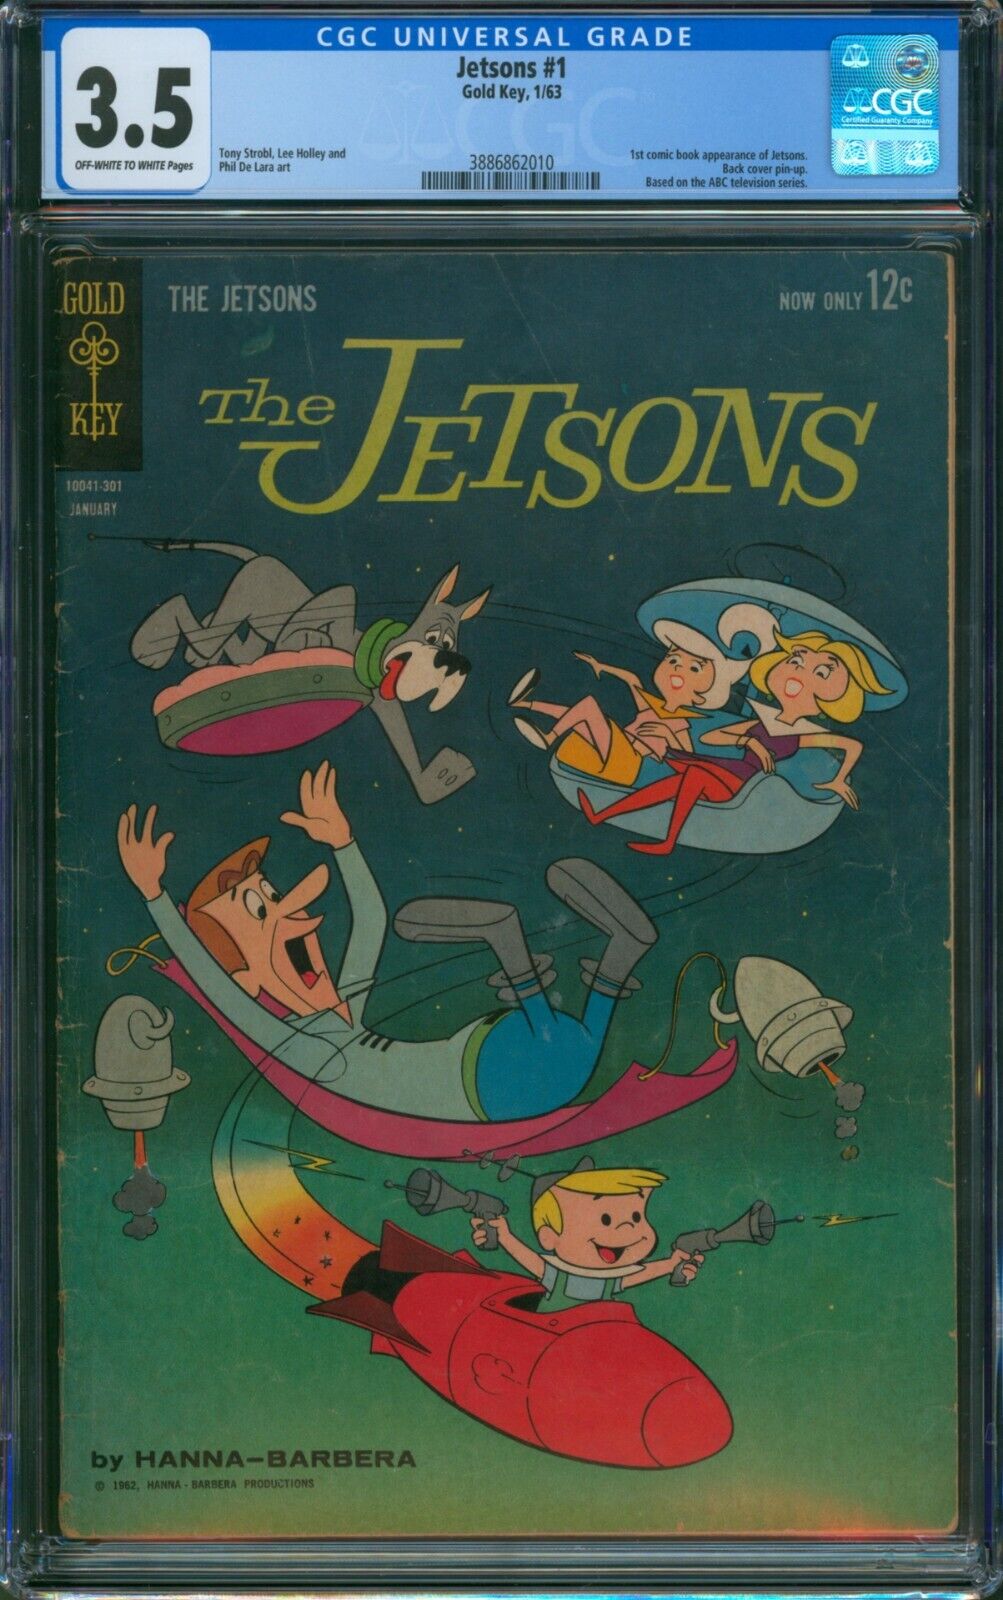 Jetsons #1 (1963) ⭐ CGC 3.5 ⭐ 1st Comic Appearance of the Jetsons Gold Key Comic